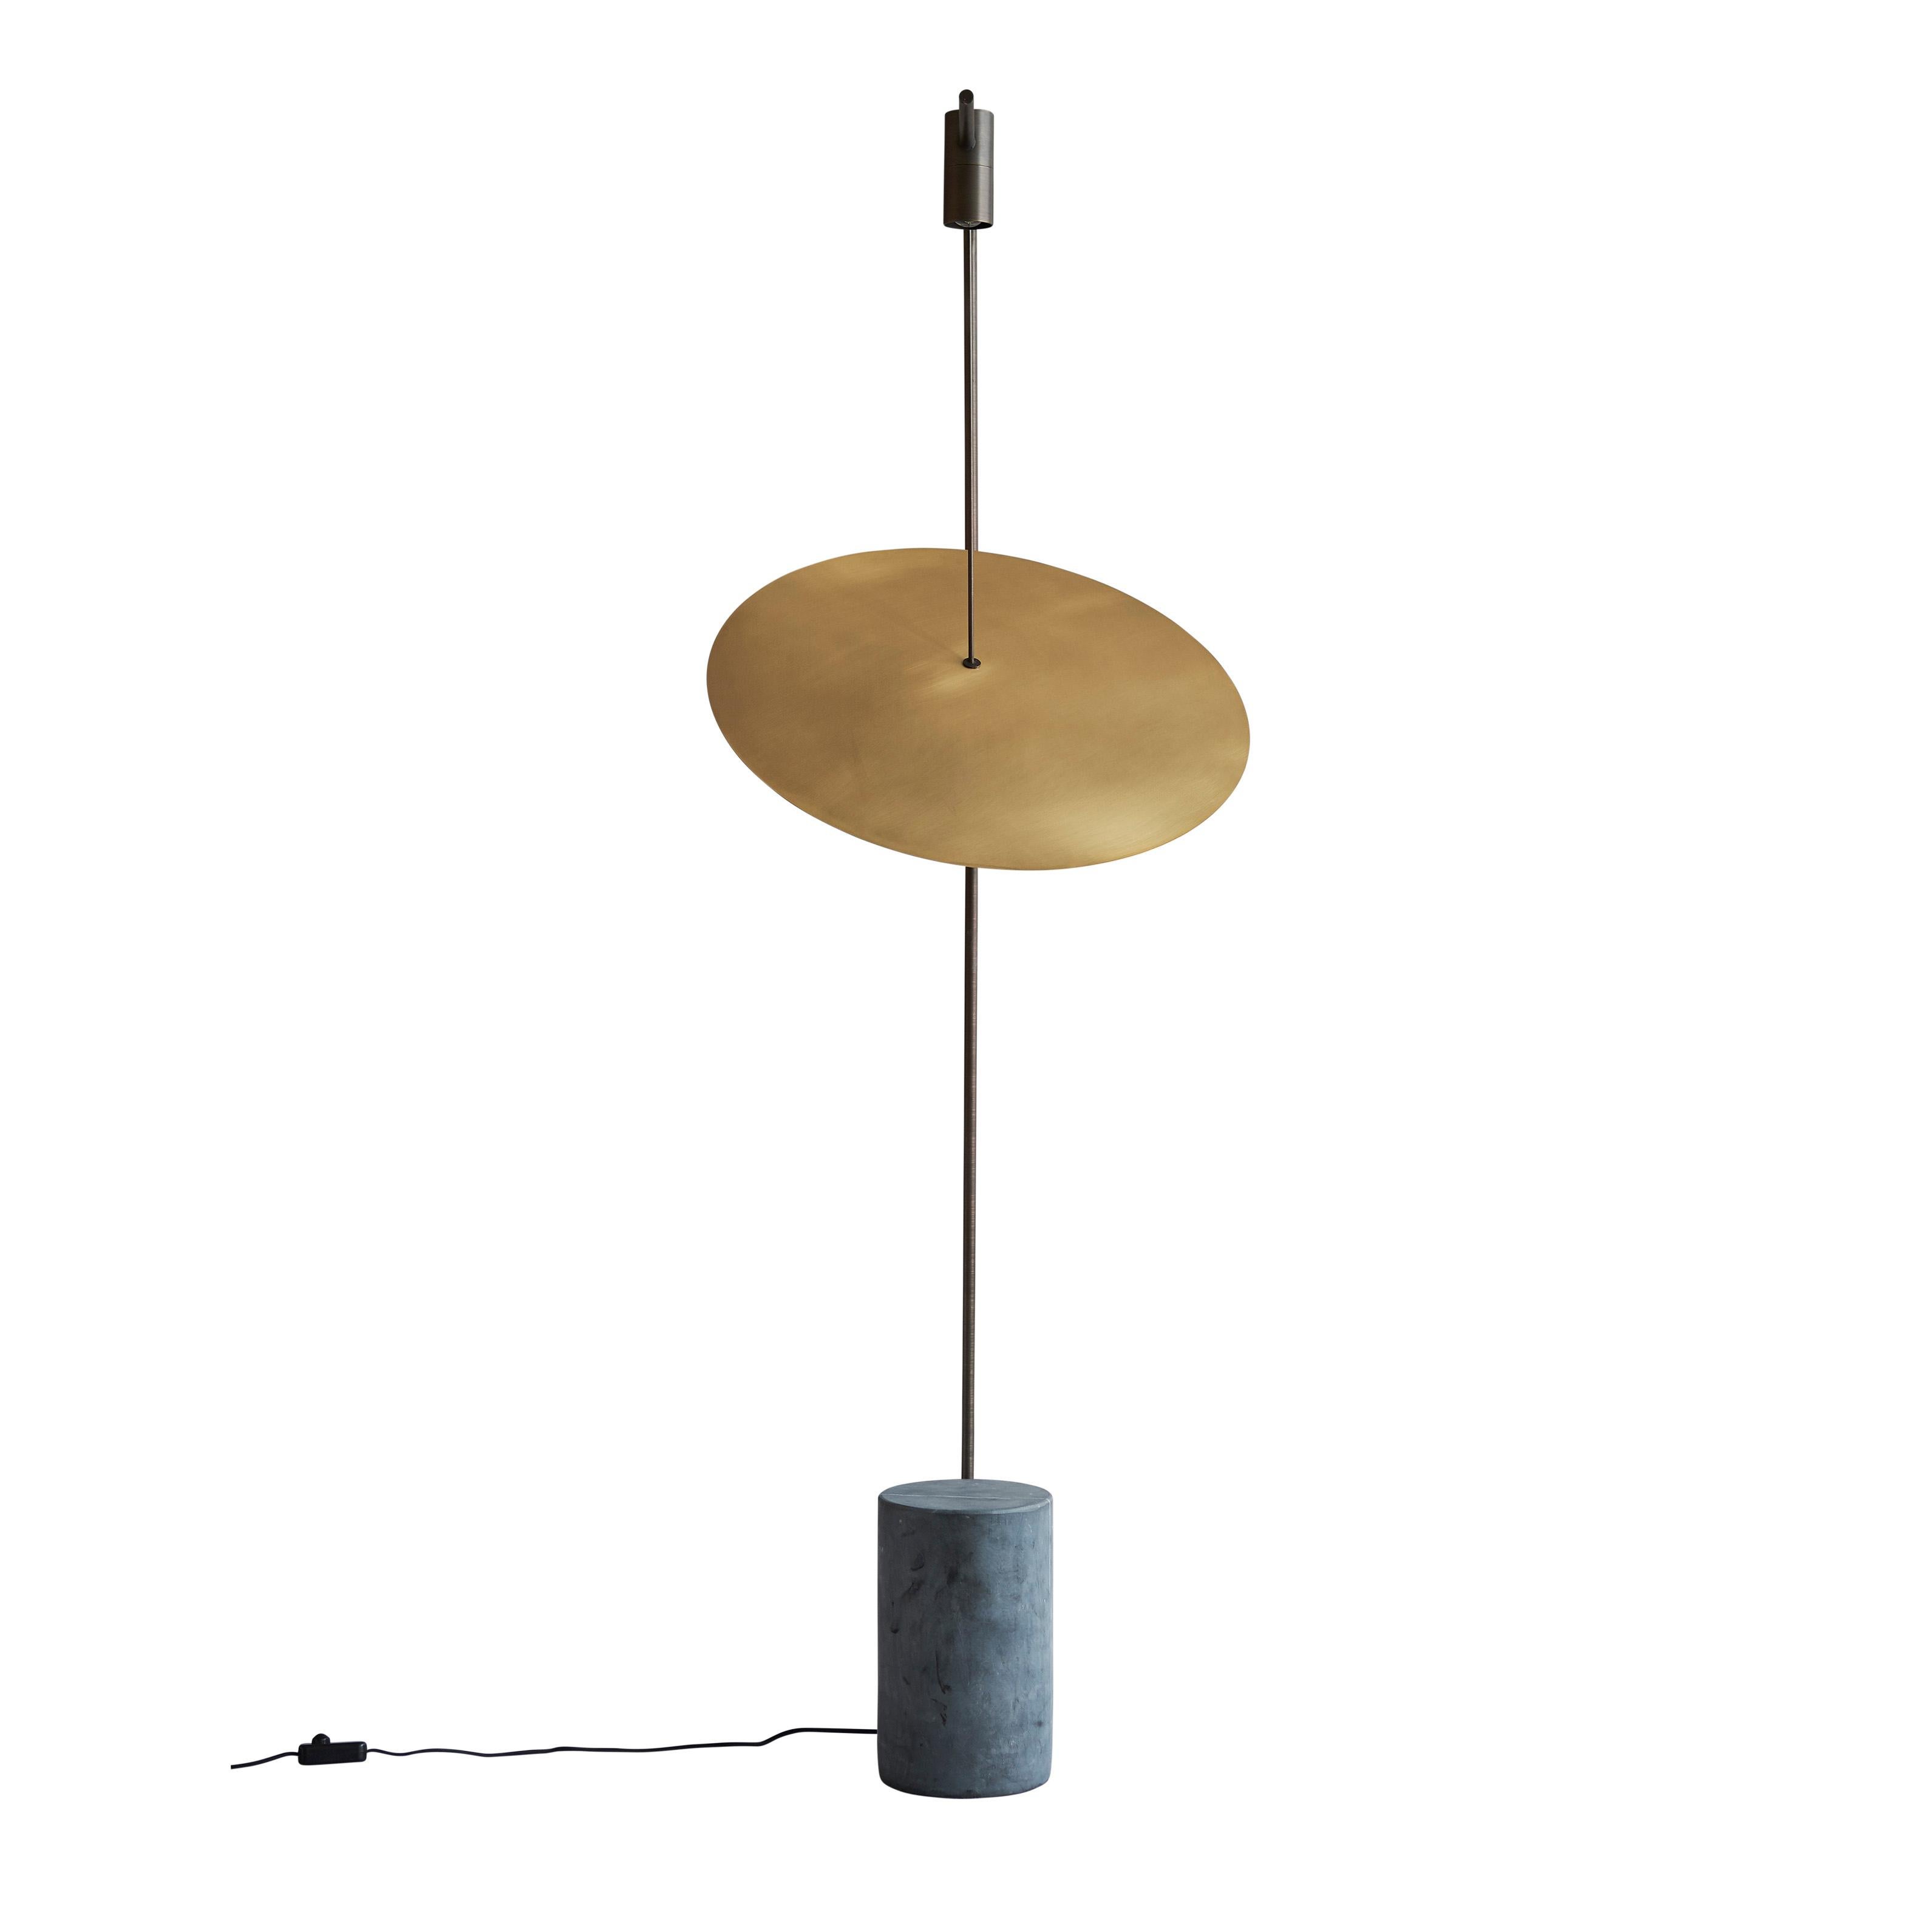 The Moon floor lamp by 101 Copenhagen
Designed by Kristian Sofus Hansen & Tommy Hyldahl.
Dimensions: L 63 x W 65 x H 188 cm
Cable length: 215 CM

Materials: Metal: Iron/ Brass
Pipes: Brushed Brass
Lamp base: Marble
Cable: Fabric covered